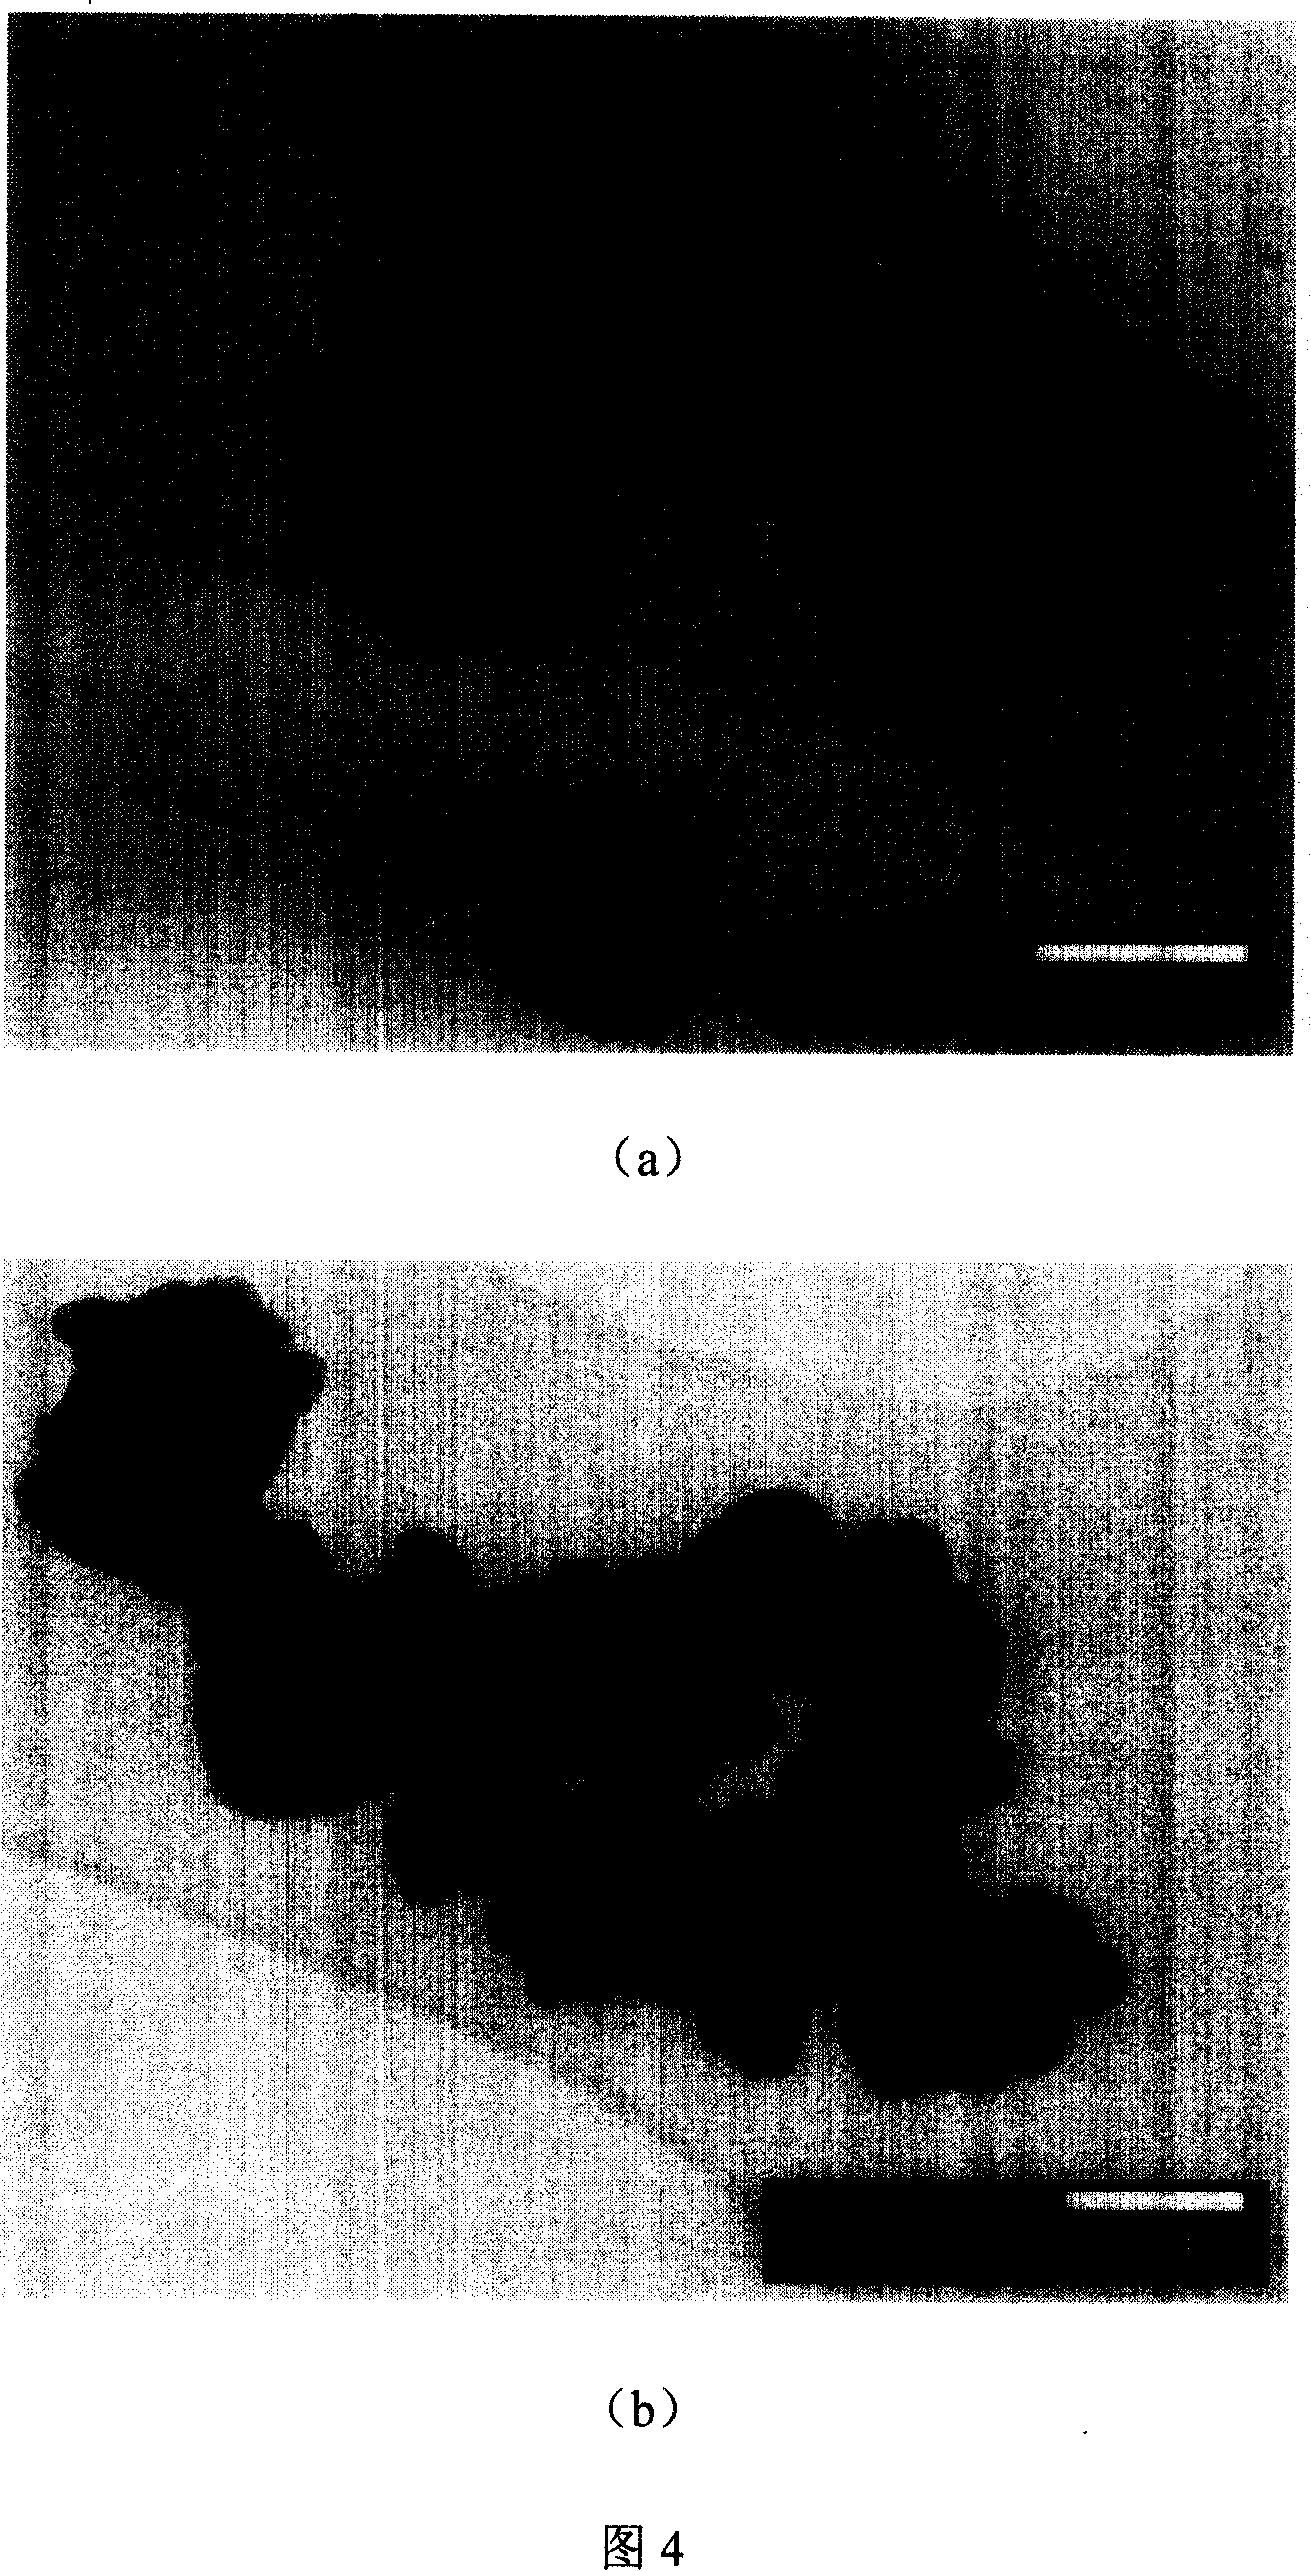 Method for producing nano zinc peroxide and zinc oxide by using solar